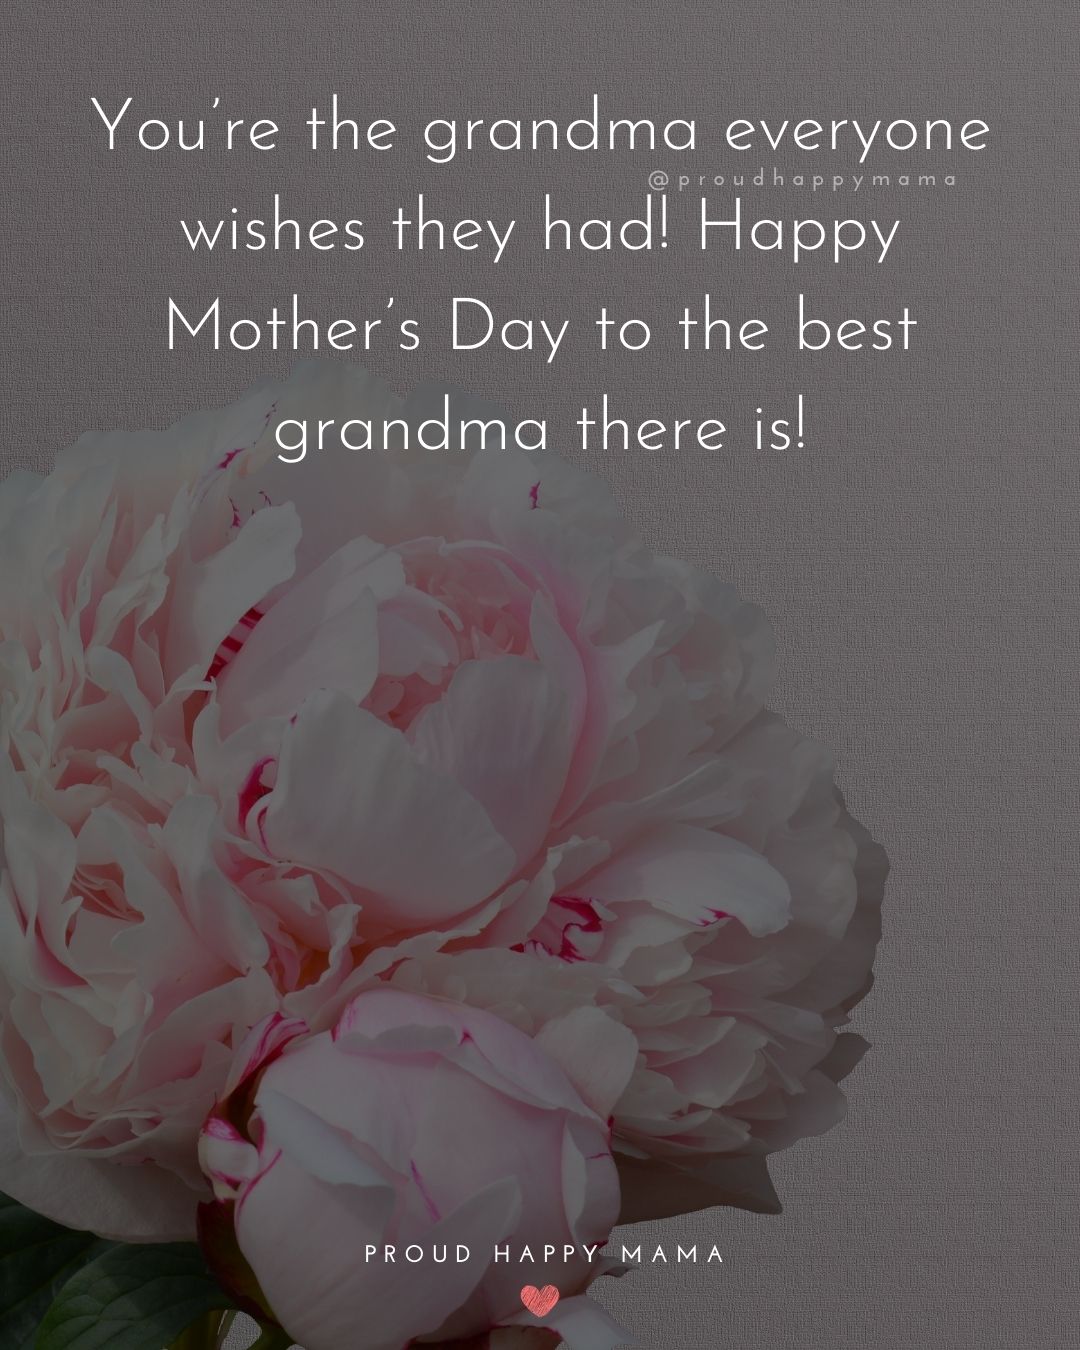 happy mothers day grandma images